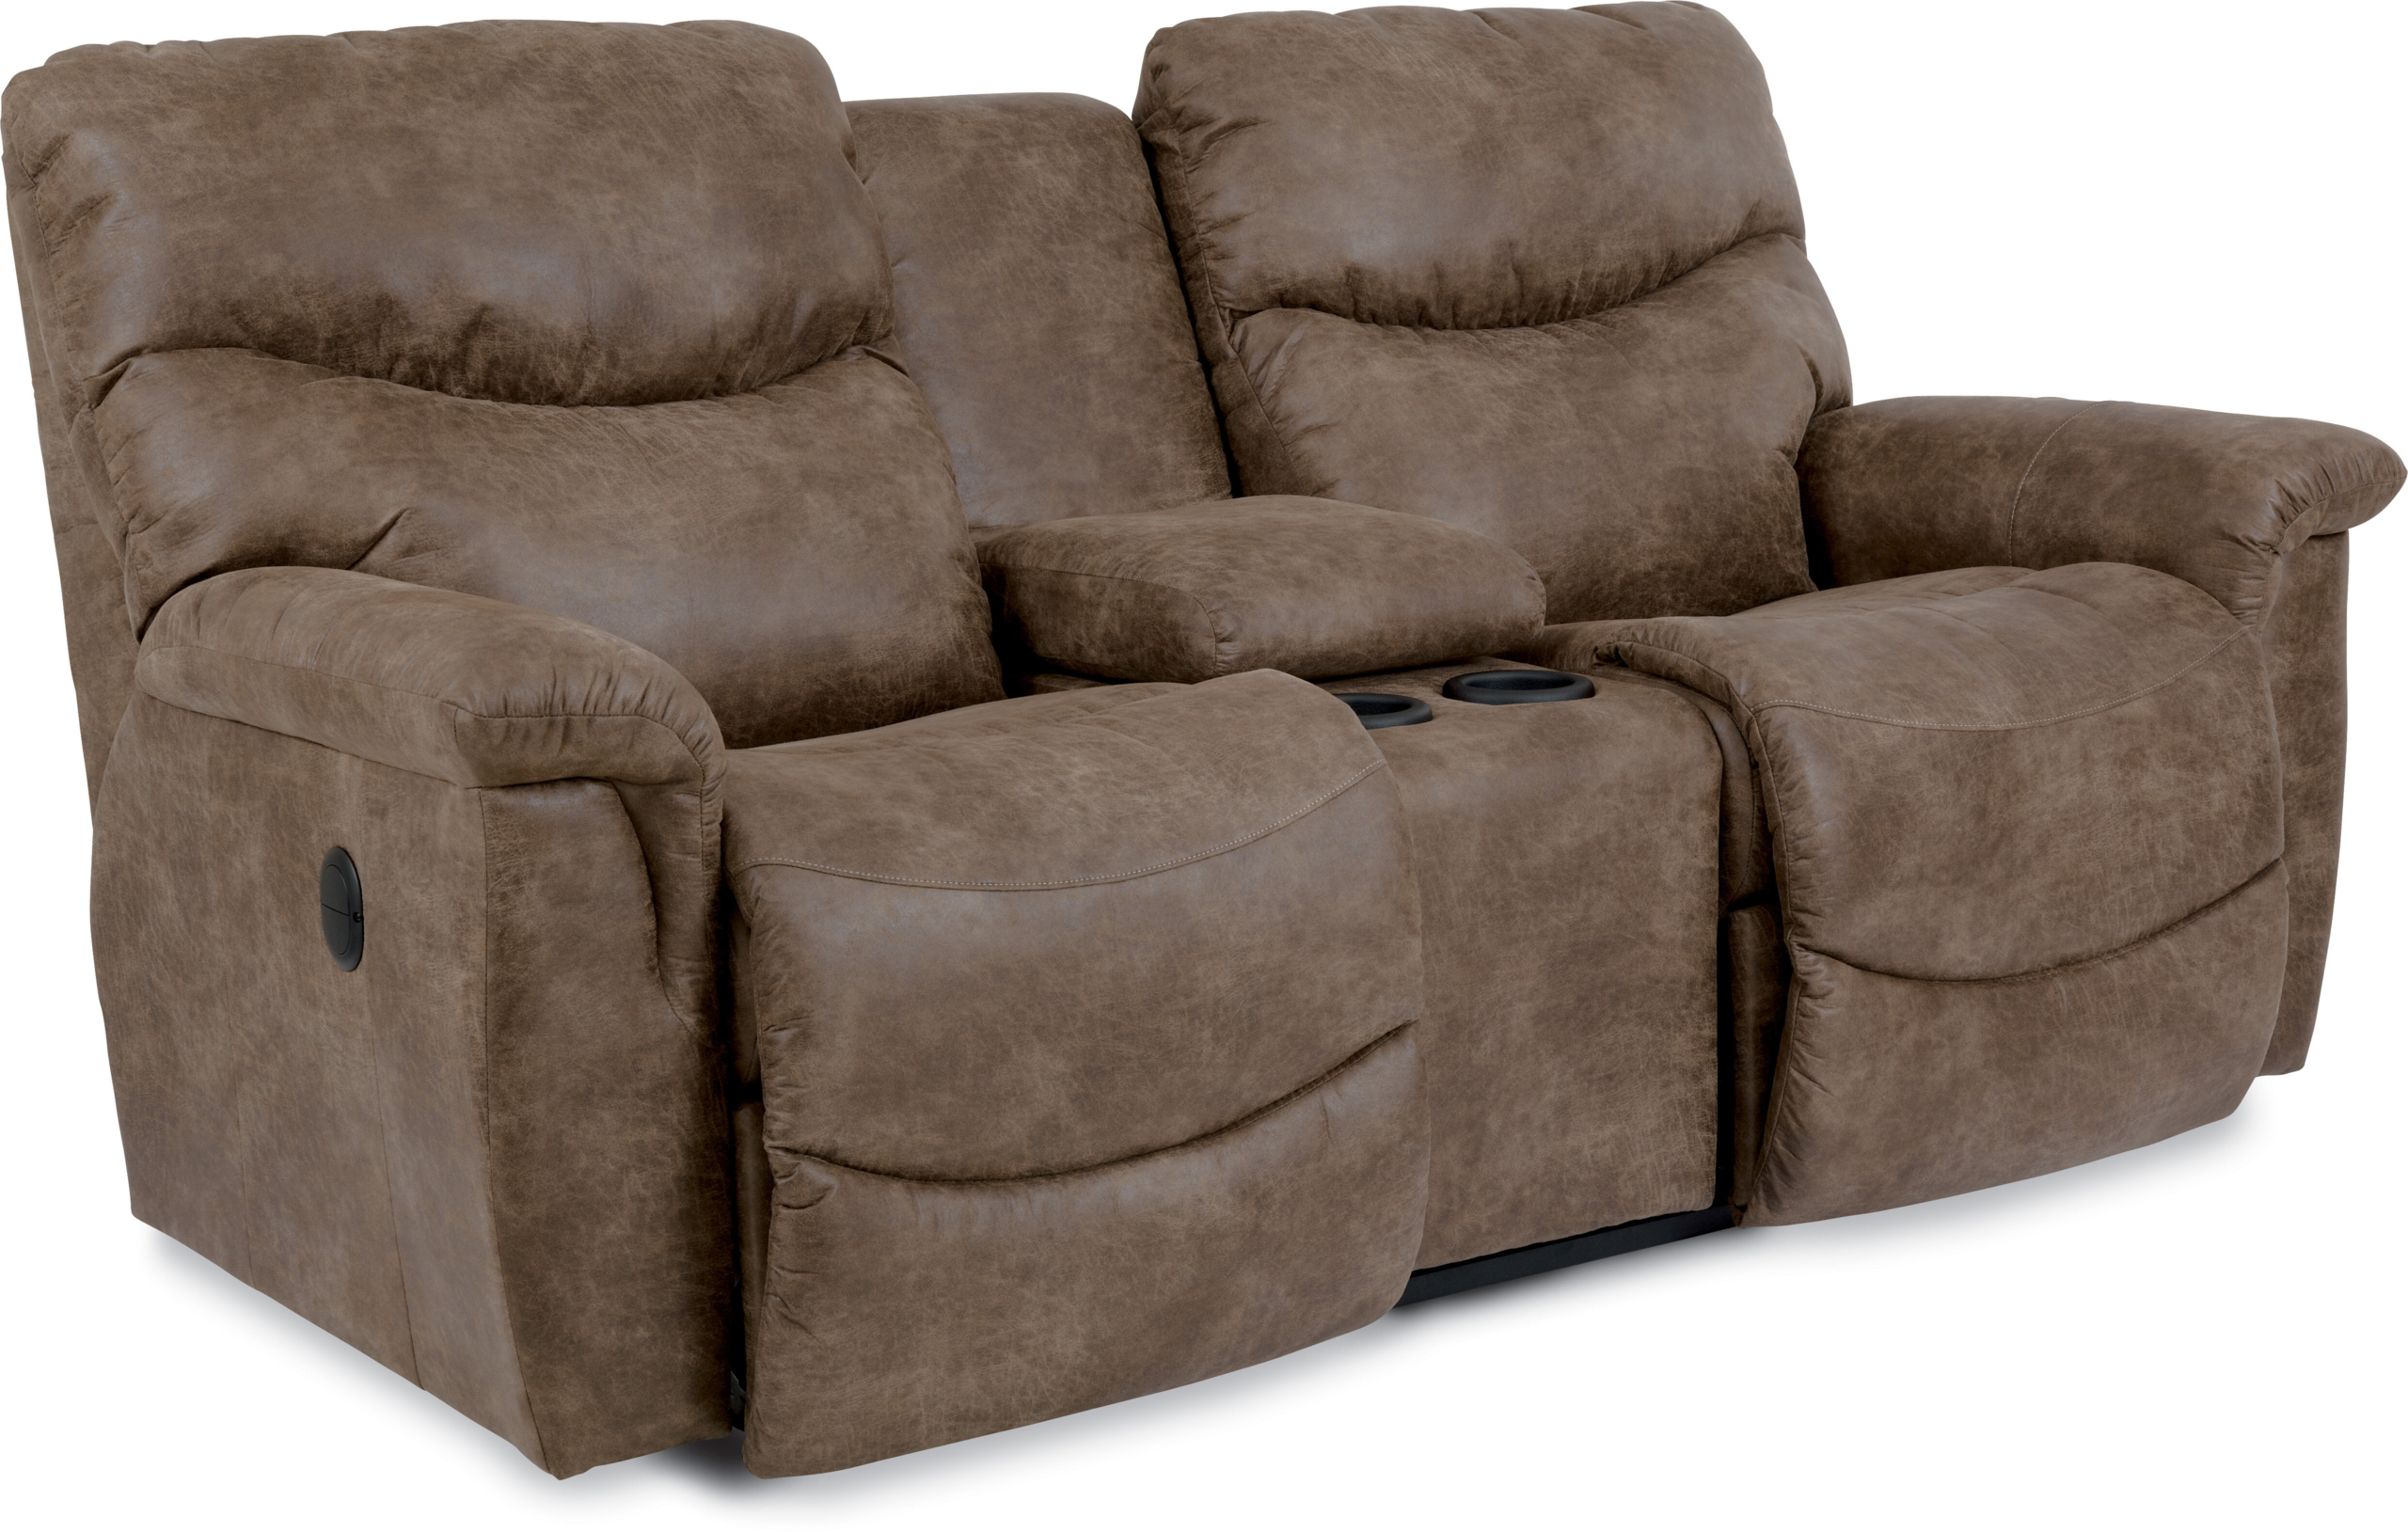 Reclining loveseat with cup holders